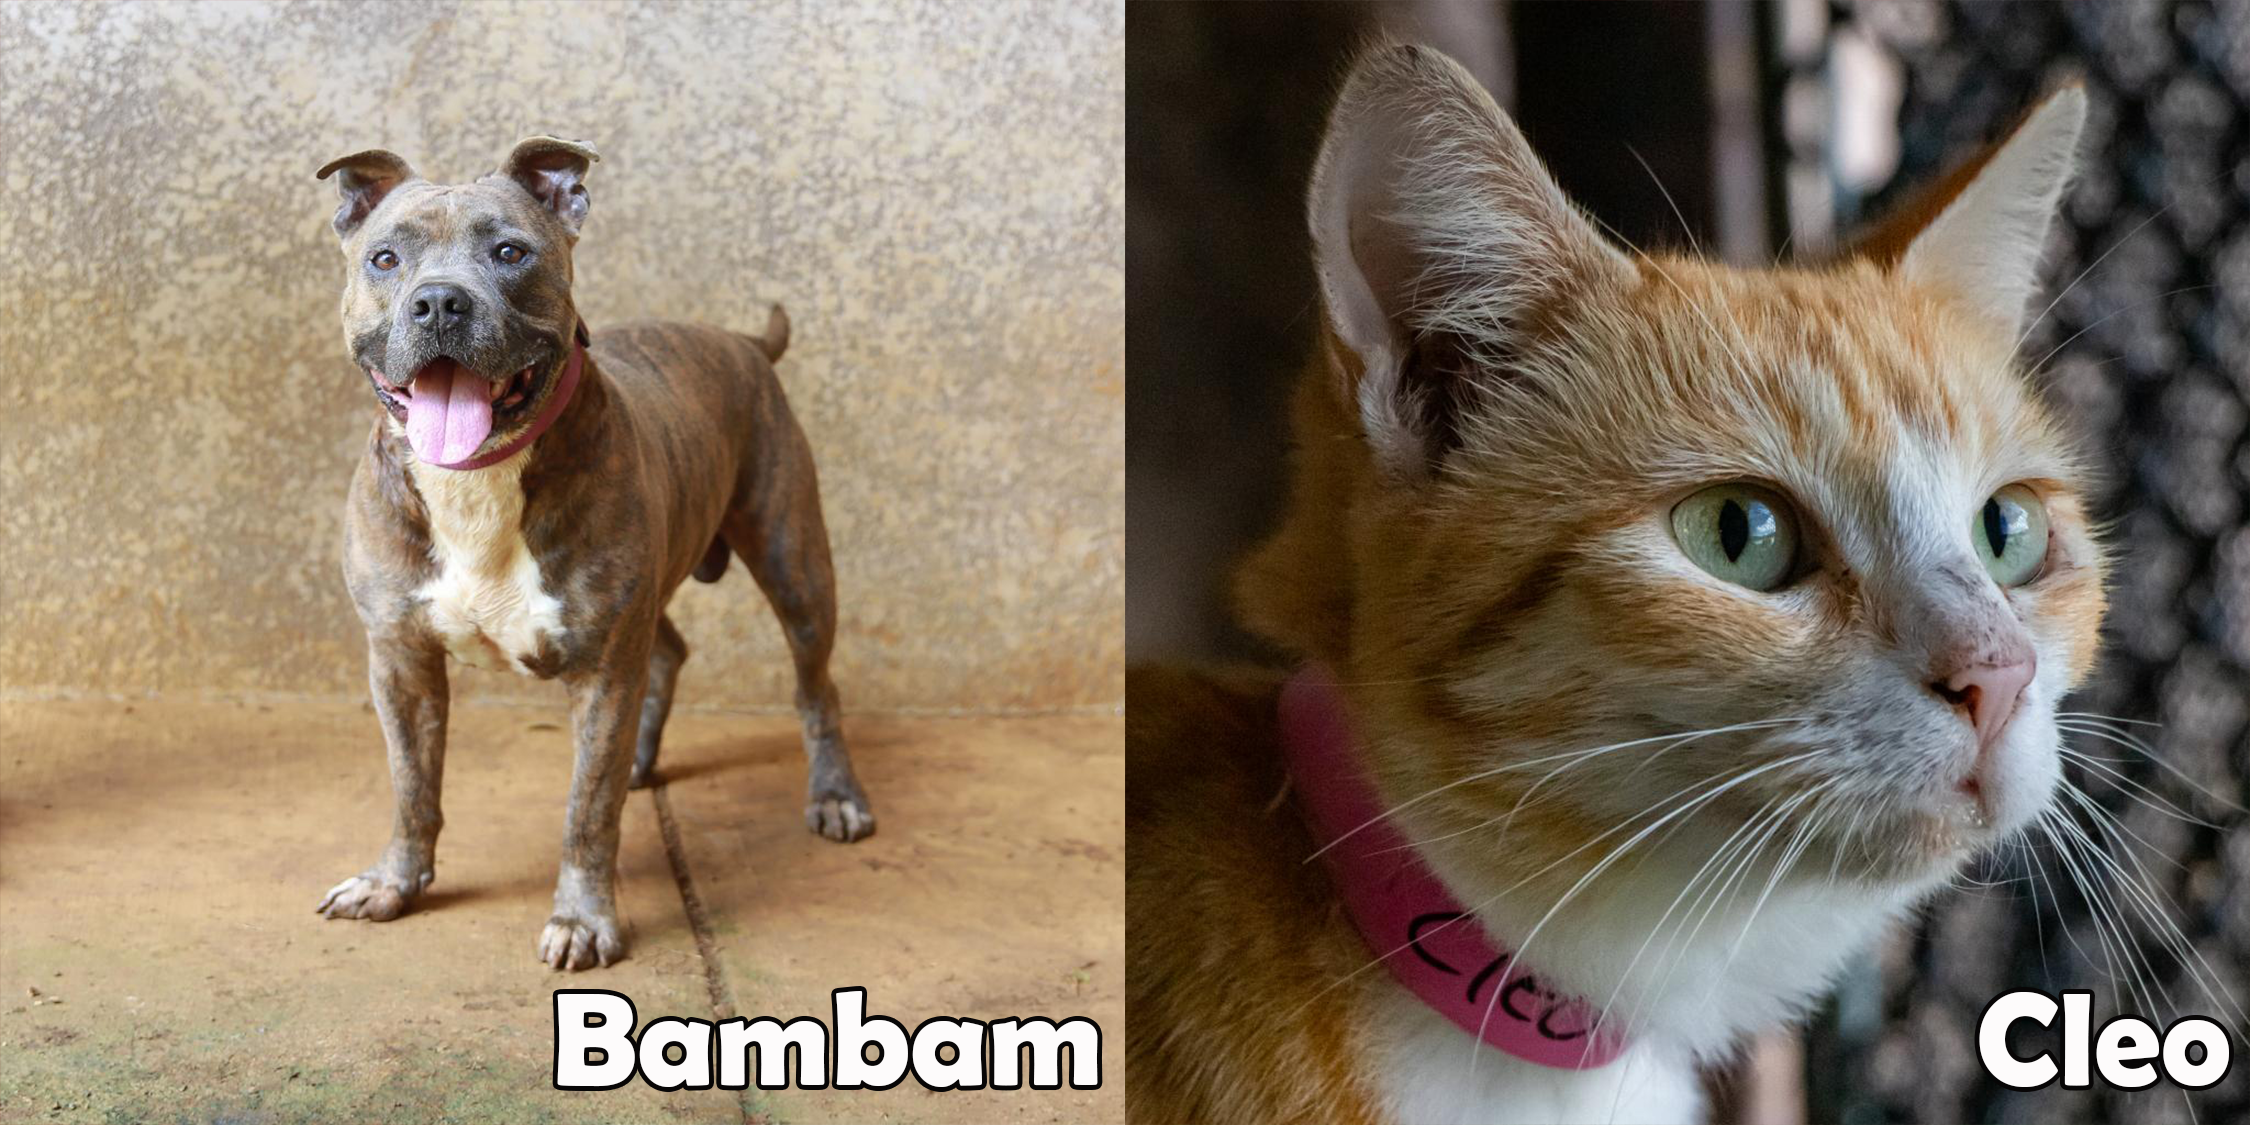 Cleo and Bambam are our two featured pets of the month.